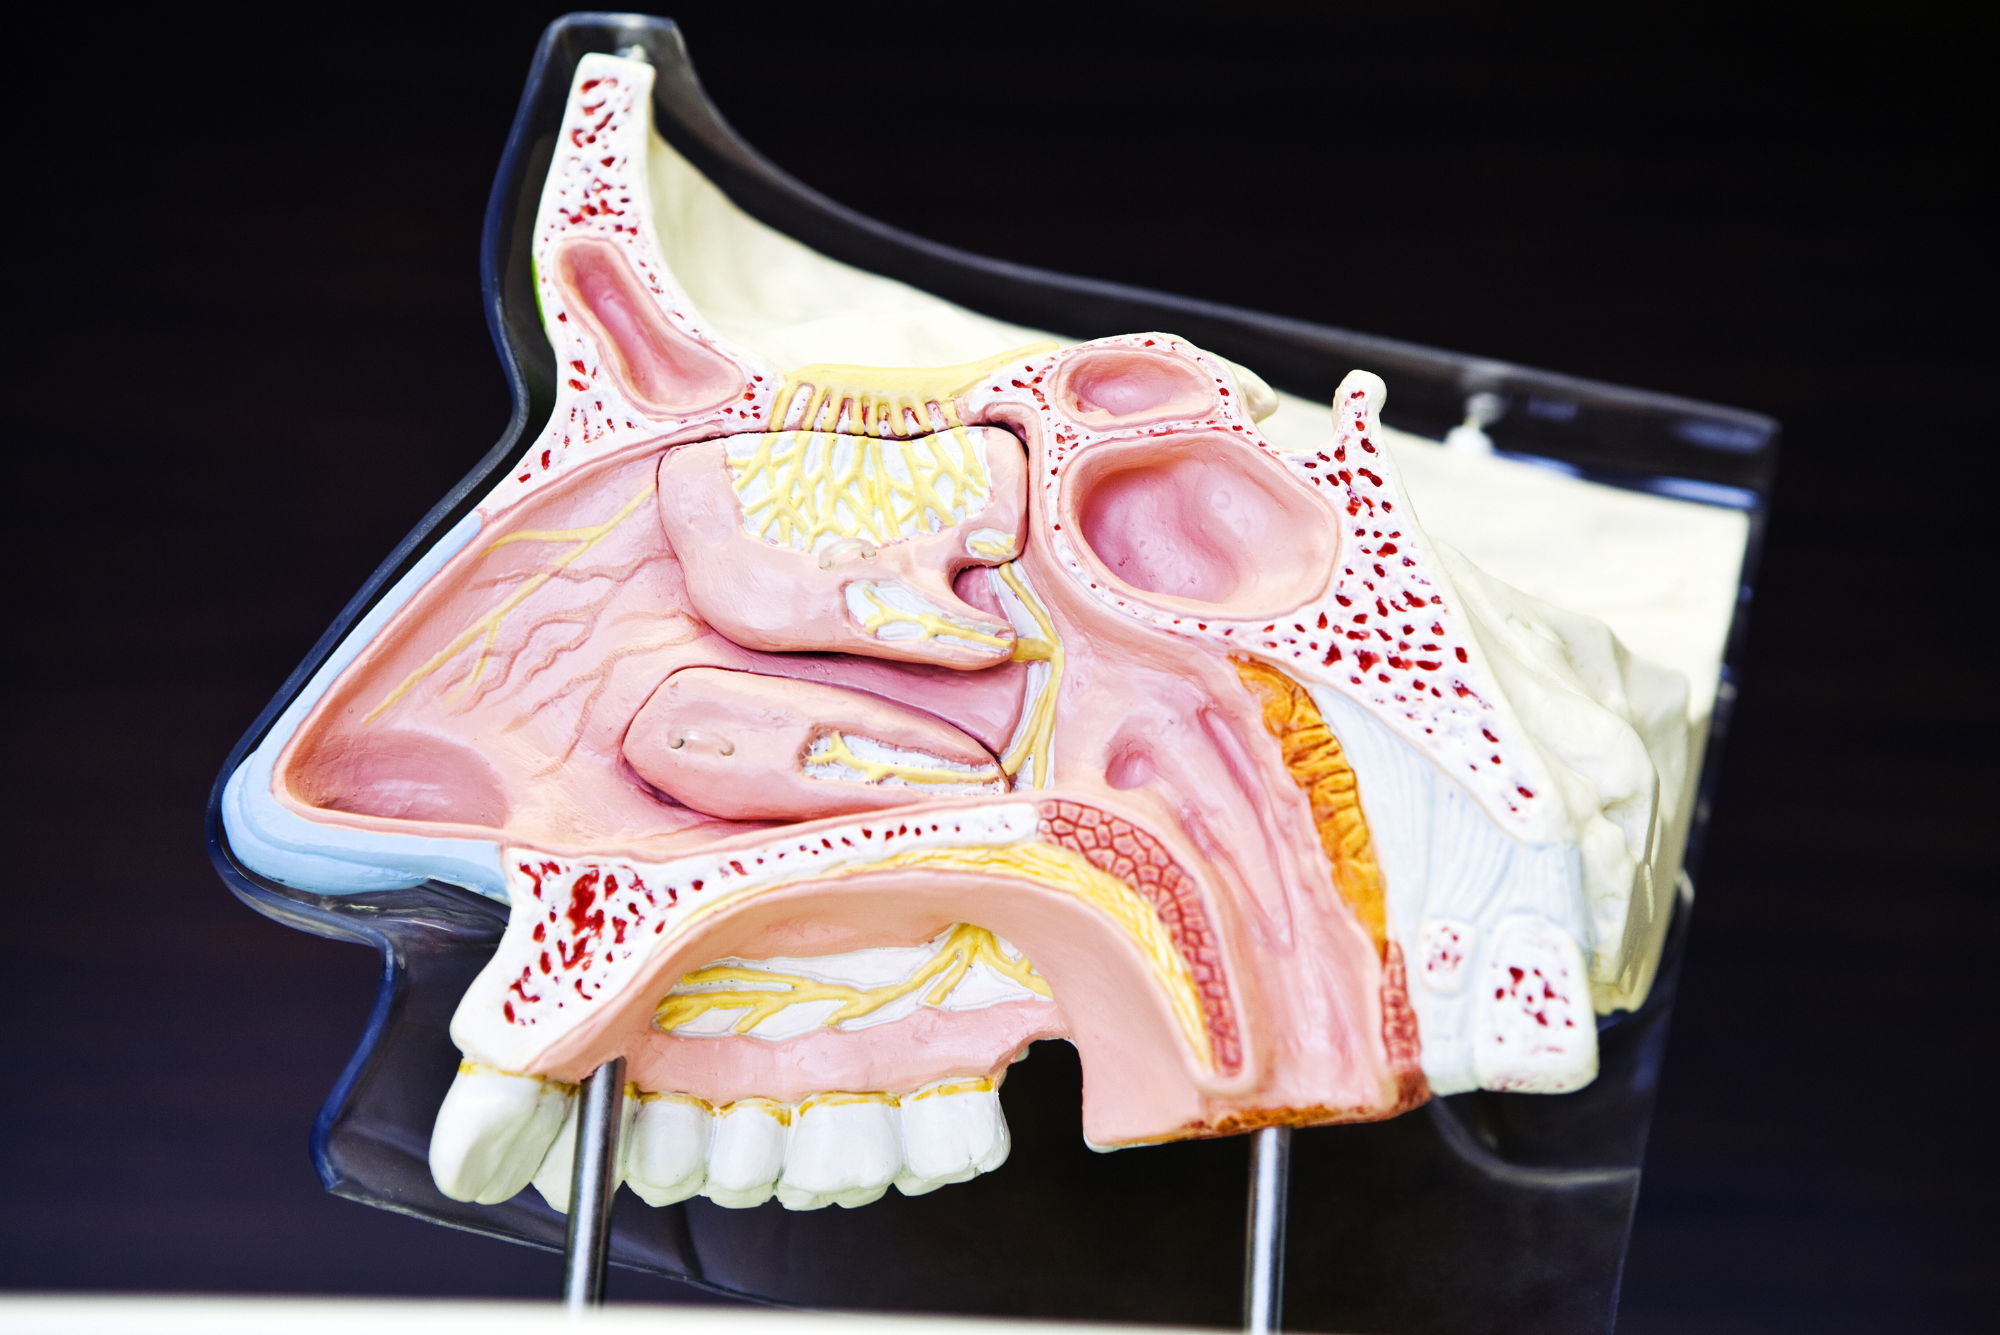 An anatomical model showing a sliced view of the inside of a nose and the sinus system.